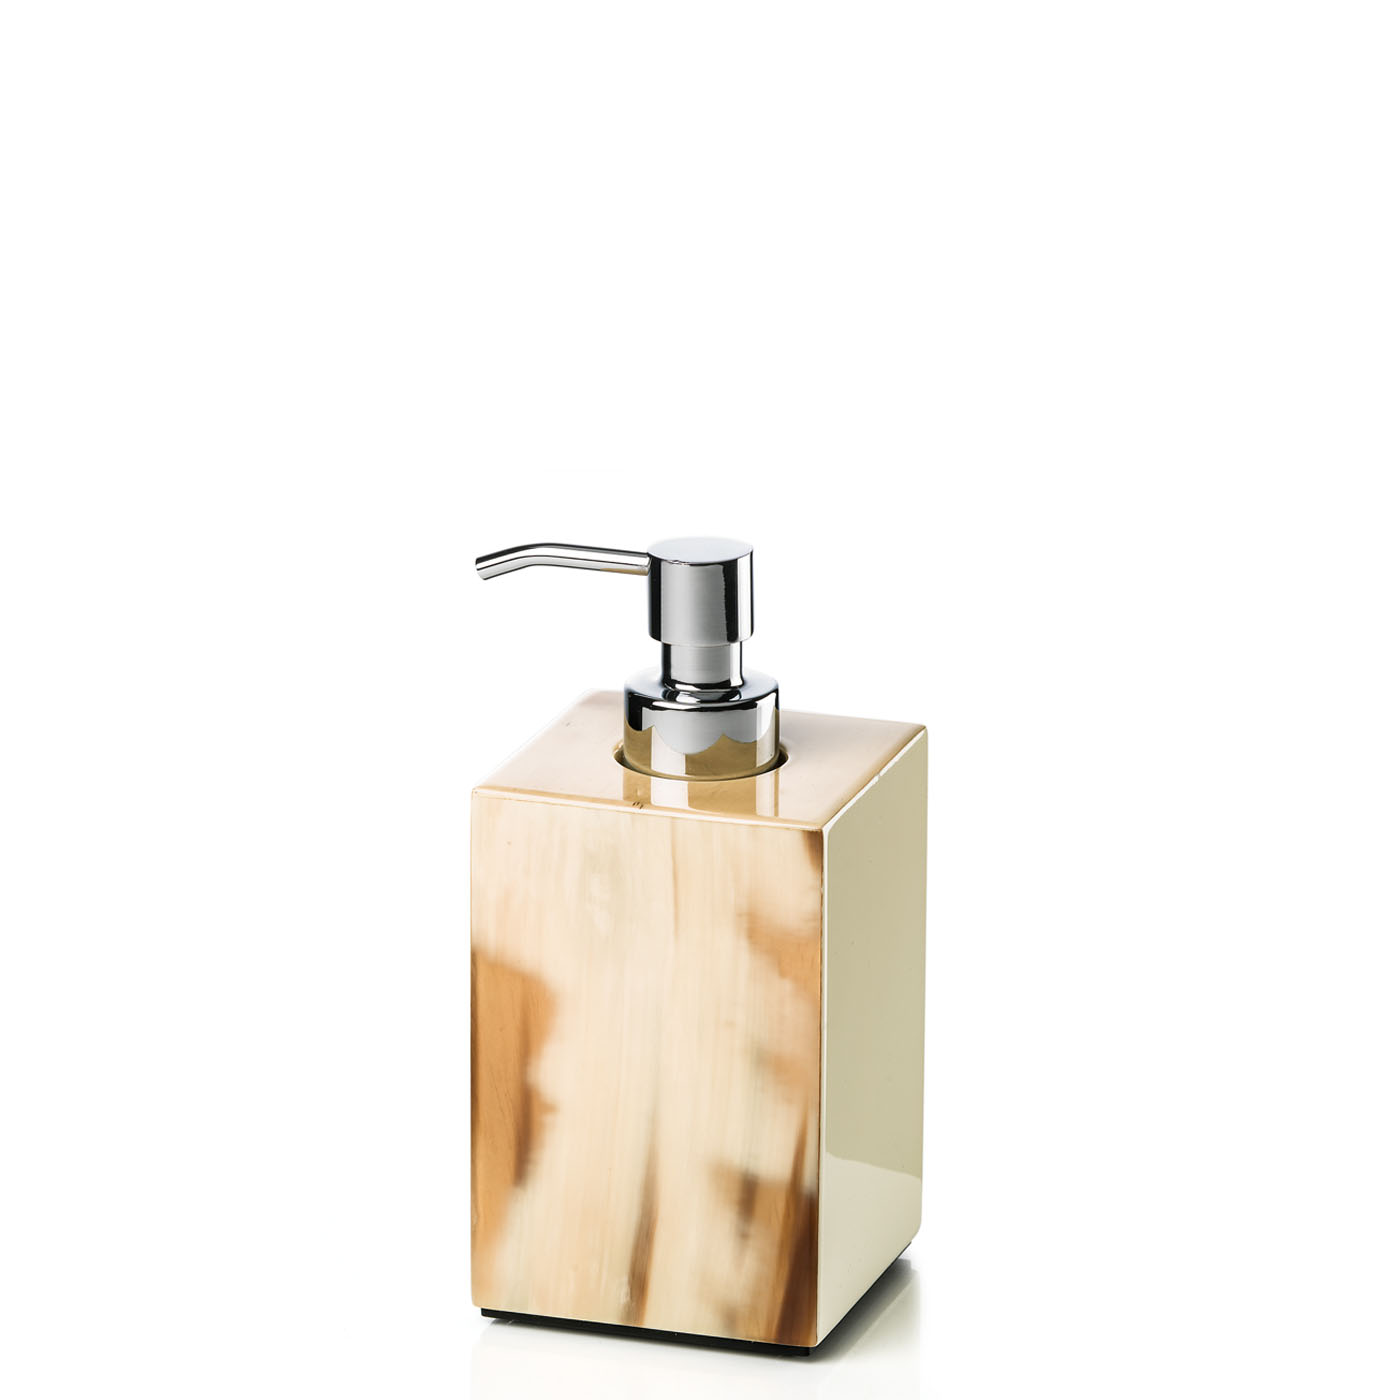 Bath sets - Iris soap dispenser in horn and glossy ivory lacquered wood 1775 - Arcahorn